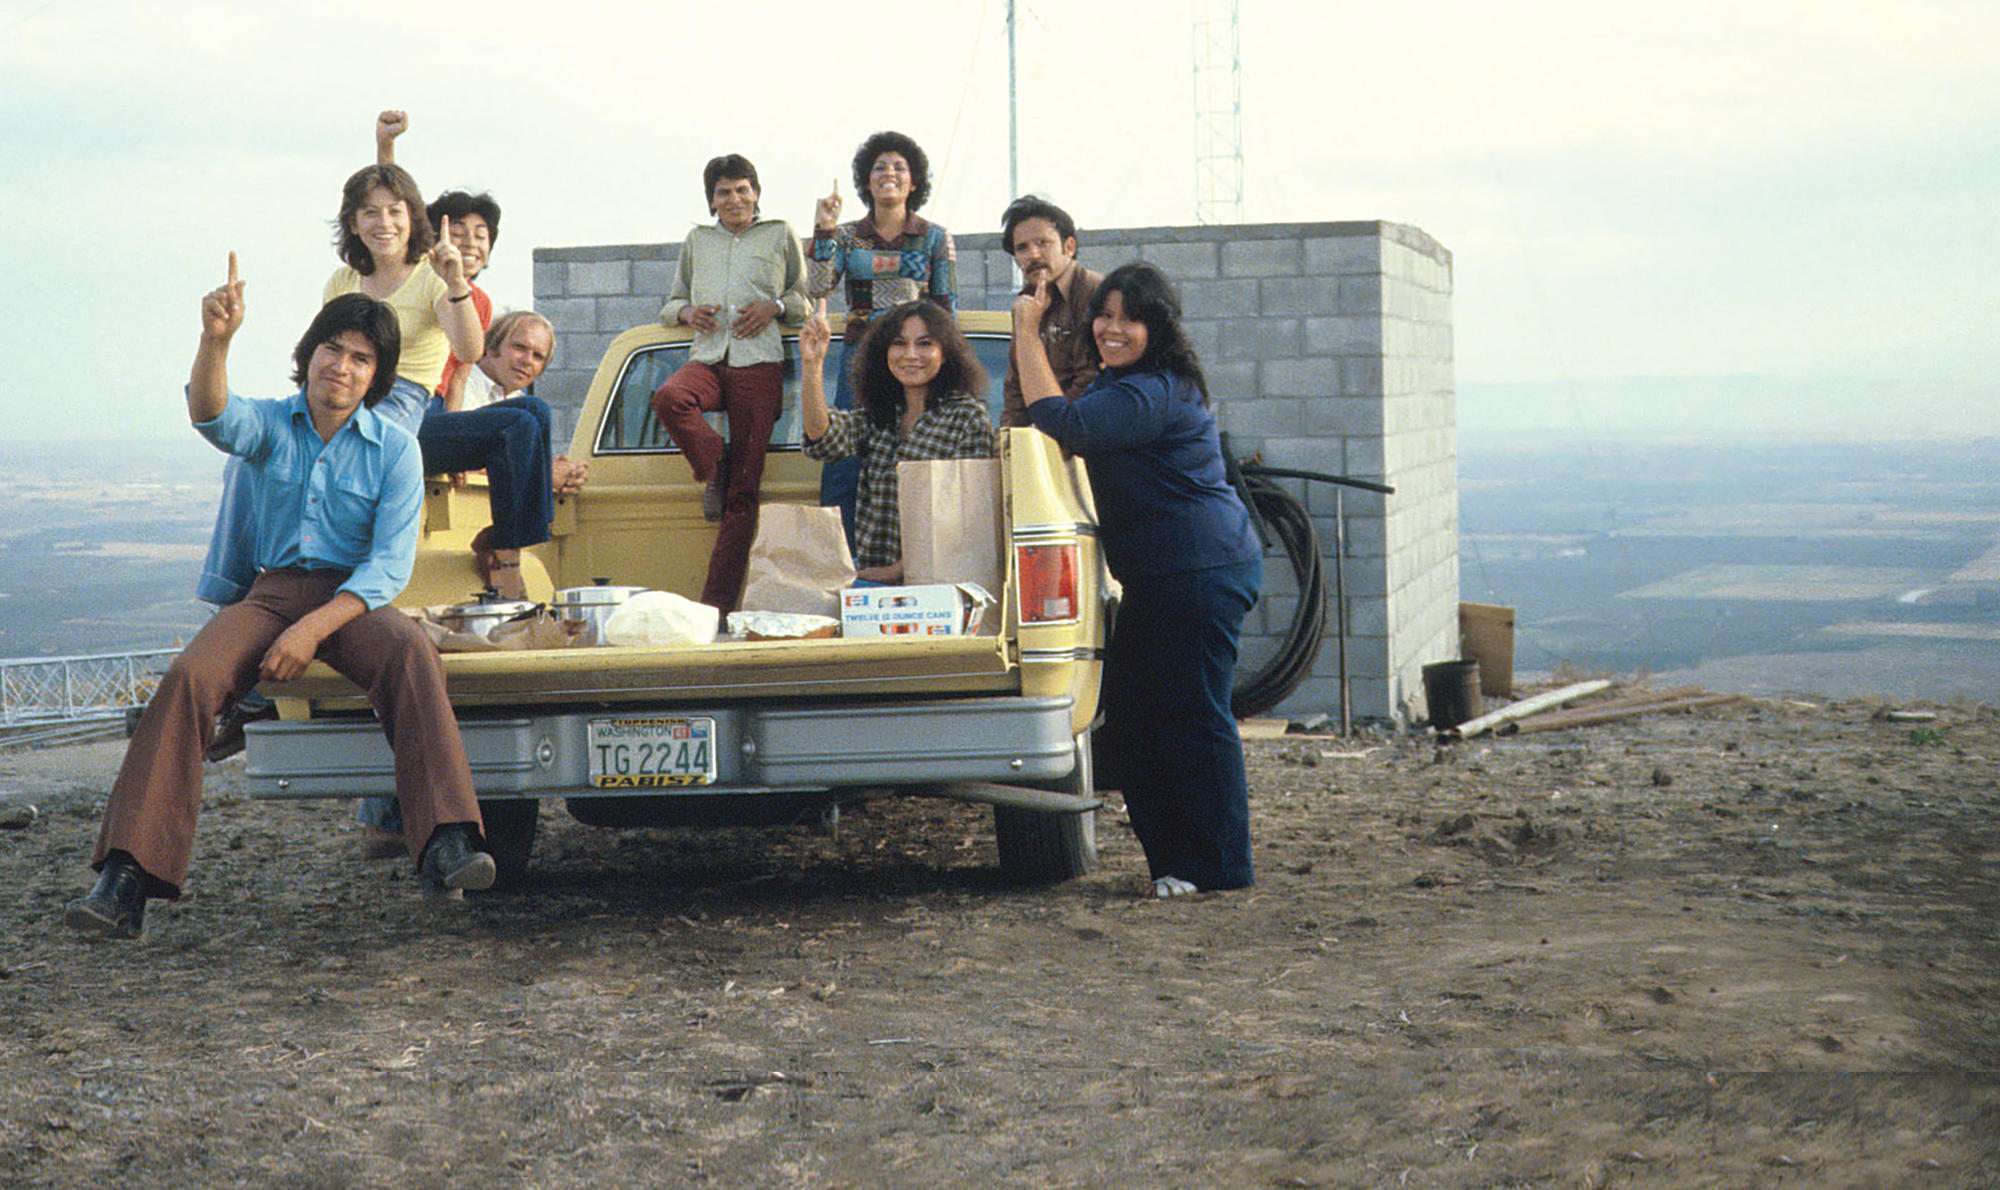 A group of people sitting on a truck in front of a small brick building overlooking a valley.